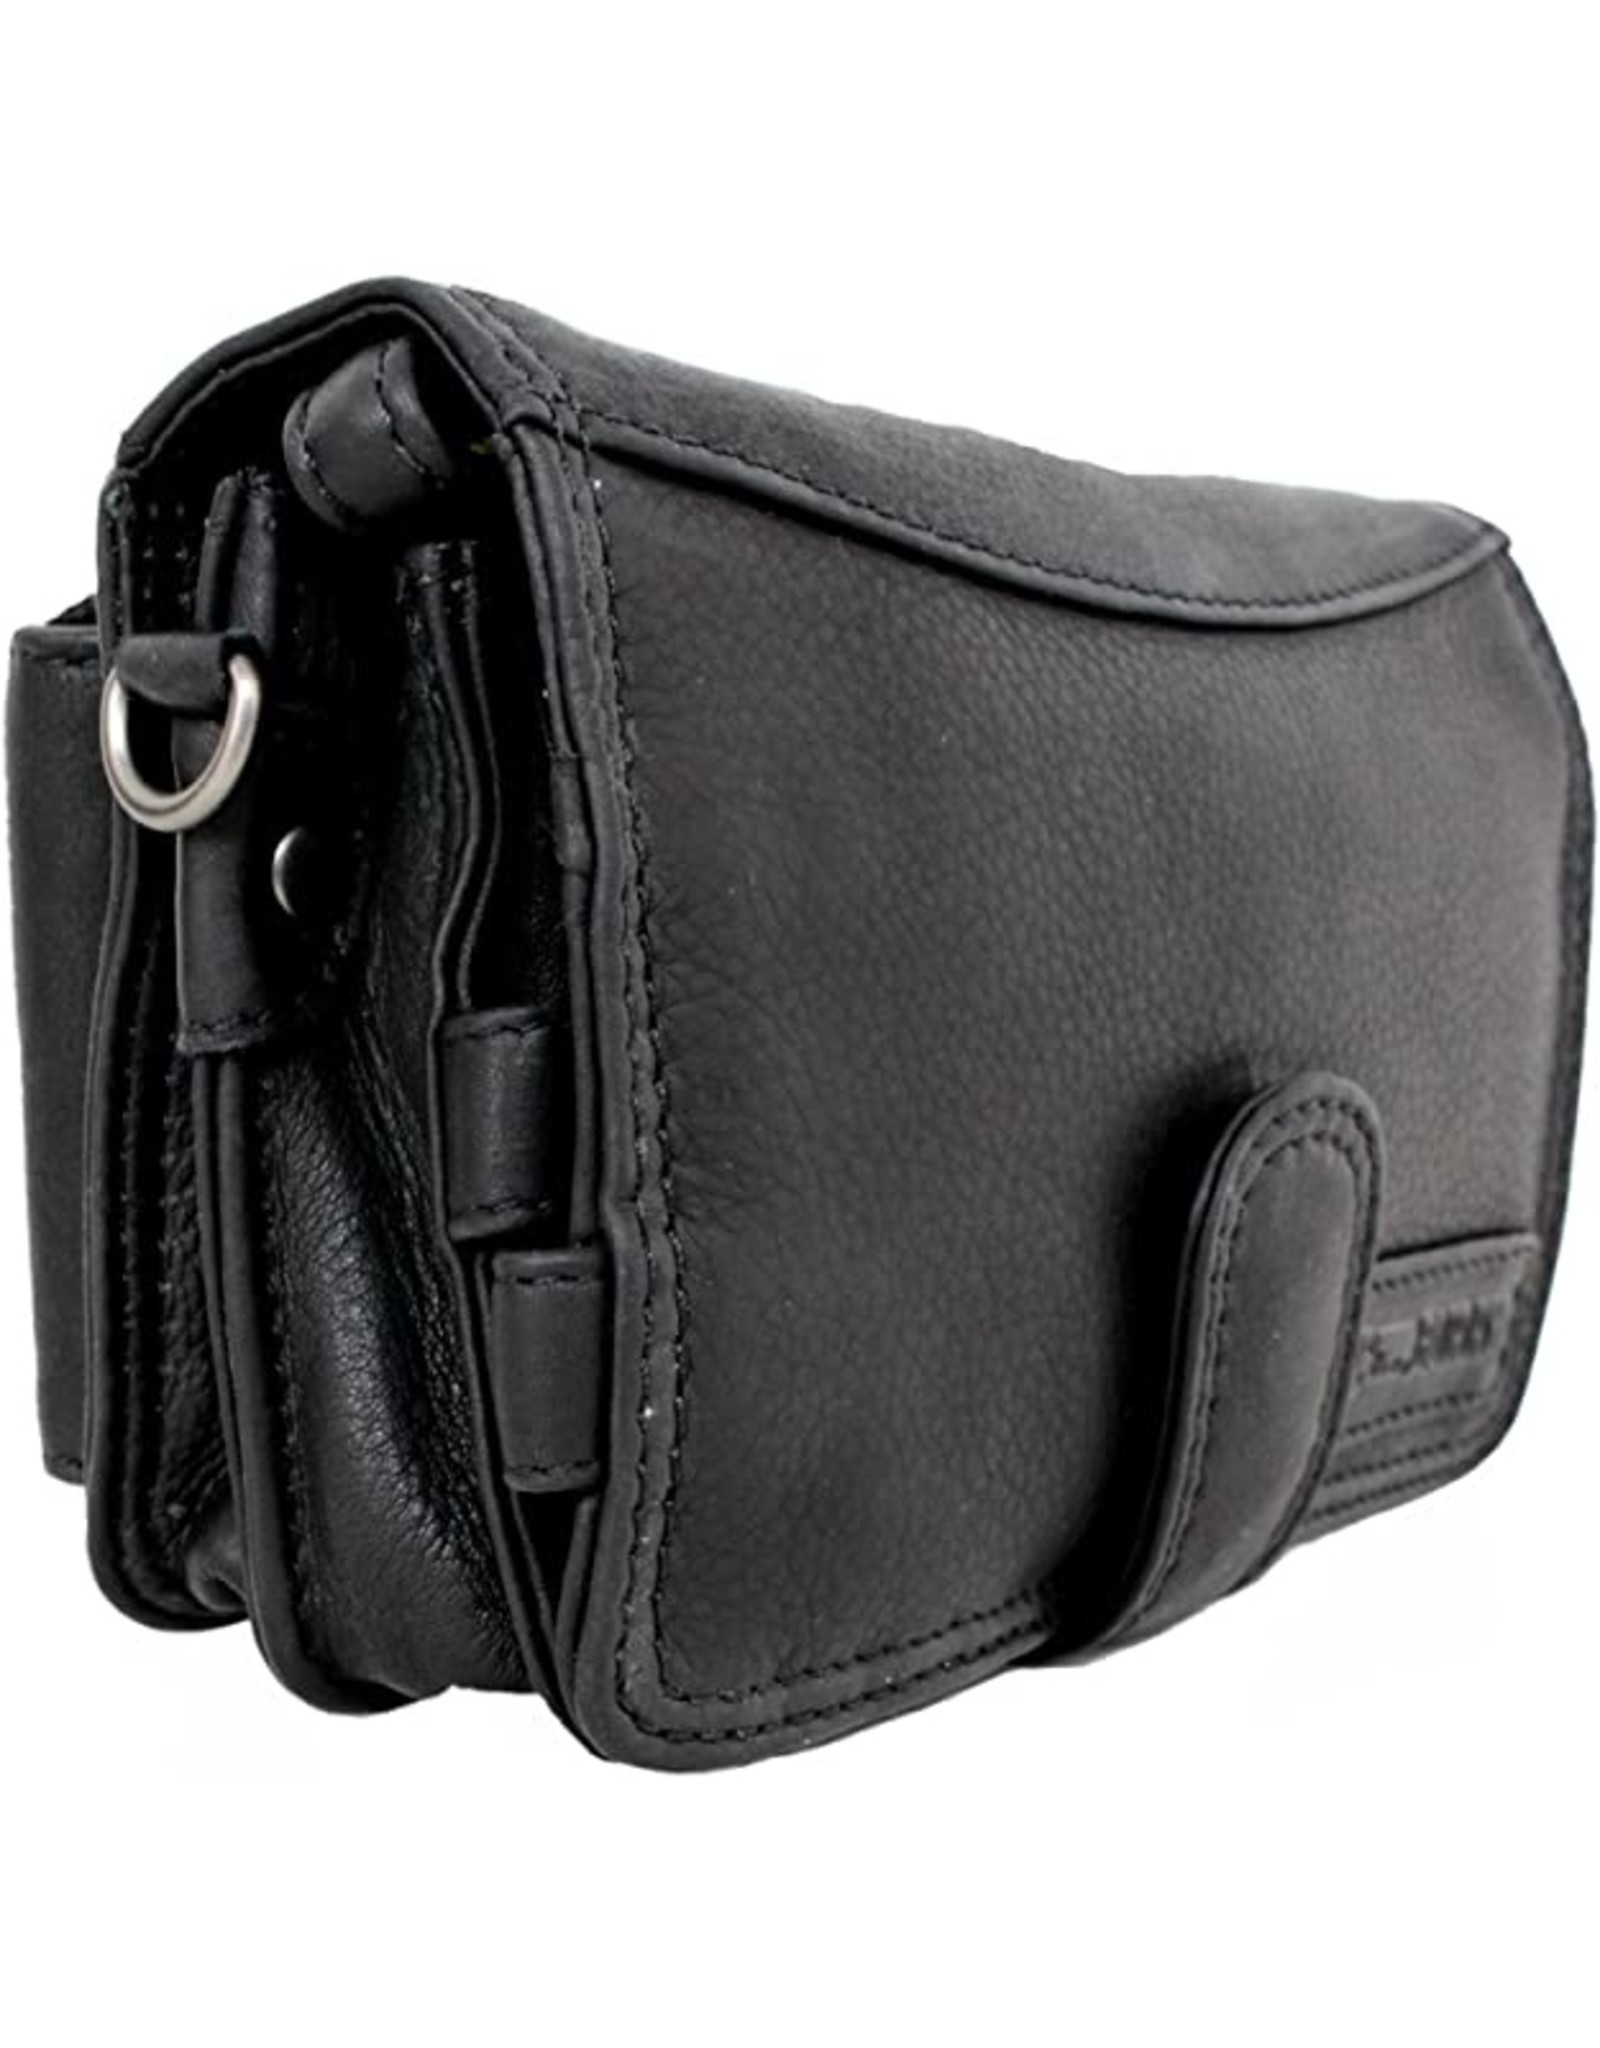 HillBurry Leather Festival bags, waist bags and belt bags - HillBurry Leather Shoulder Bag-Wallet-Phone holder black